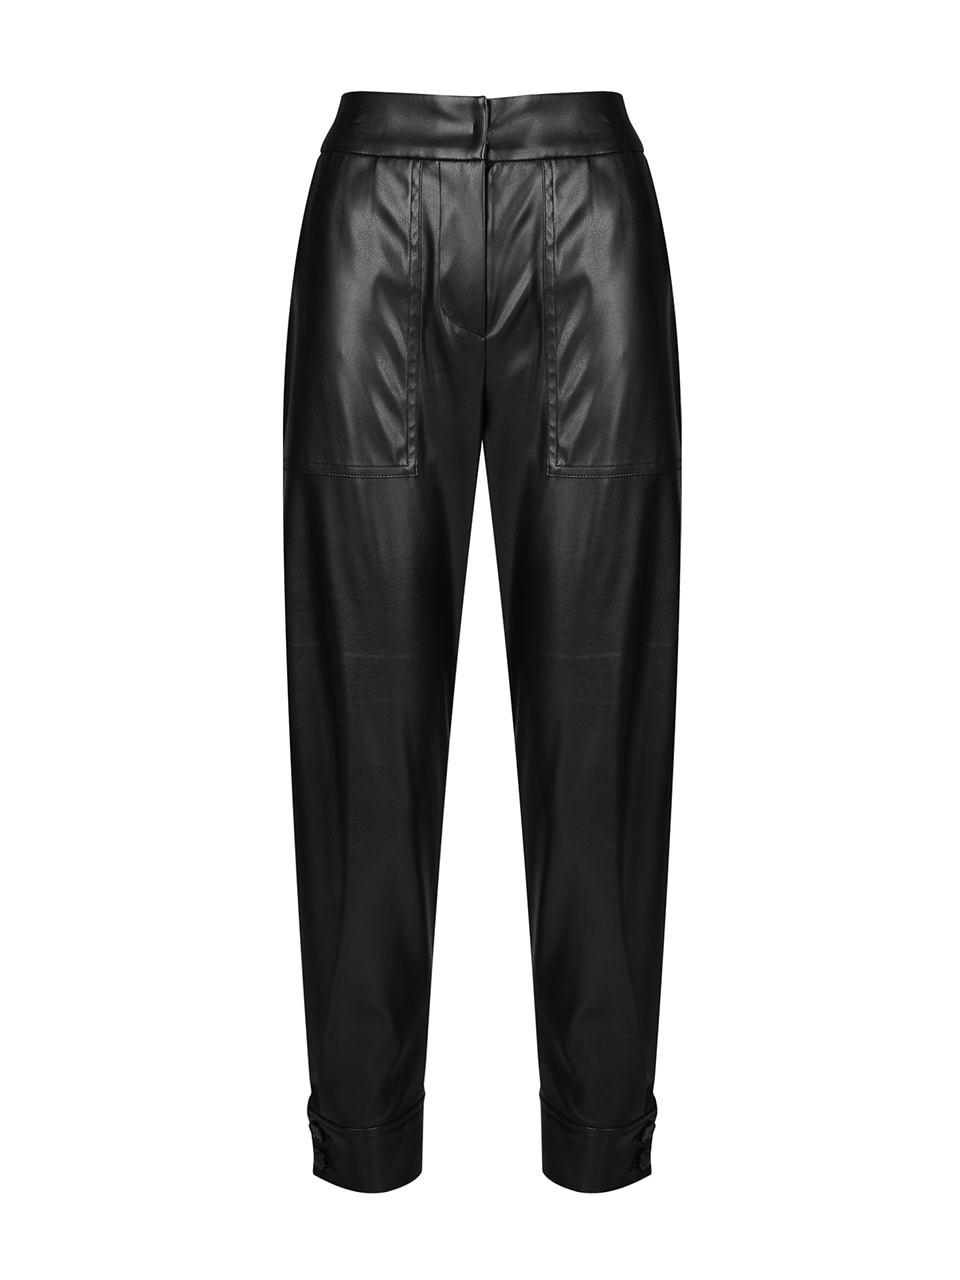 SLOUCHY CUFF ECO LEATHER PANTS - BLACK